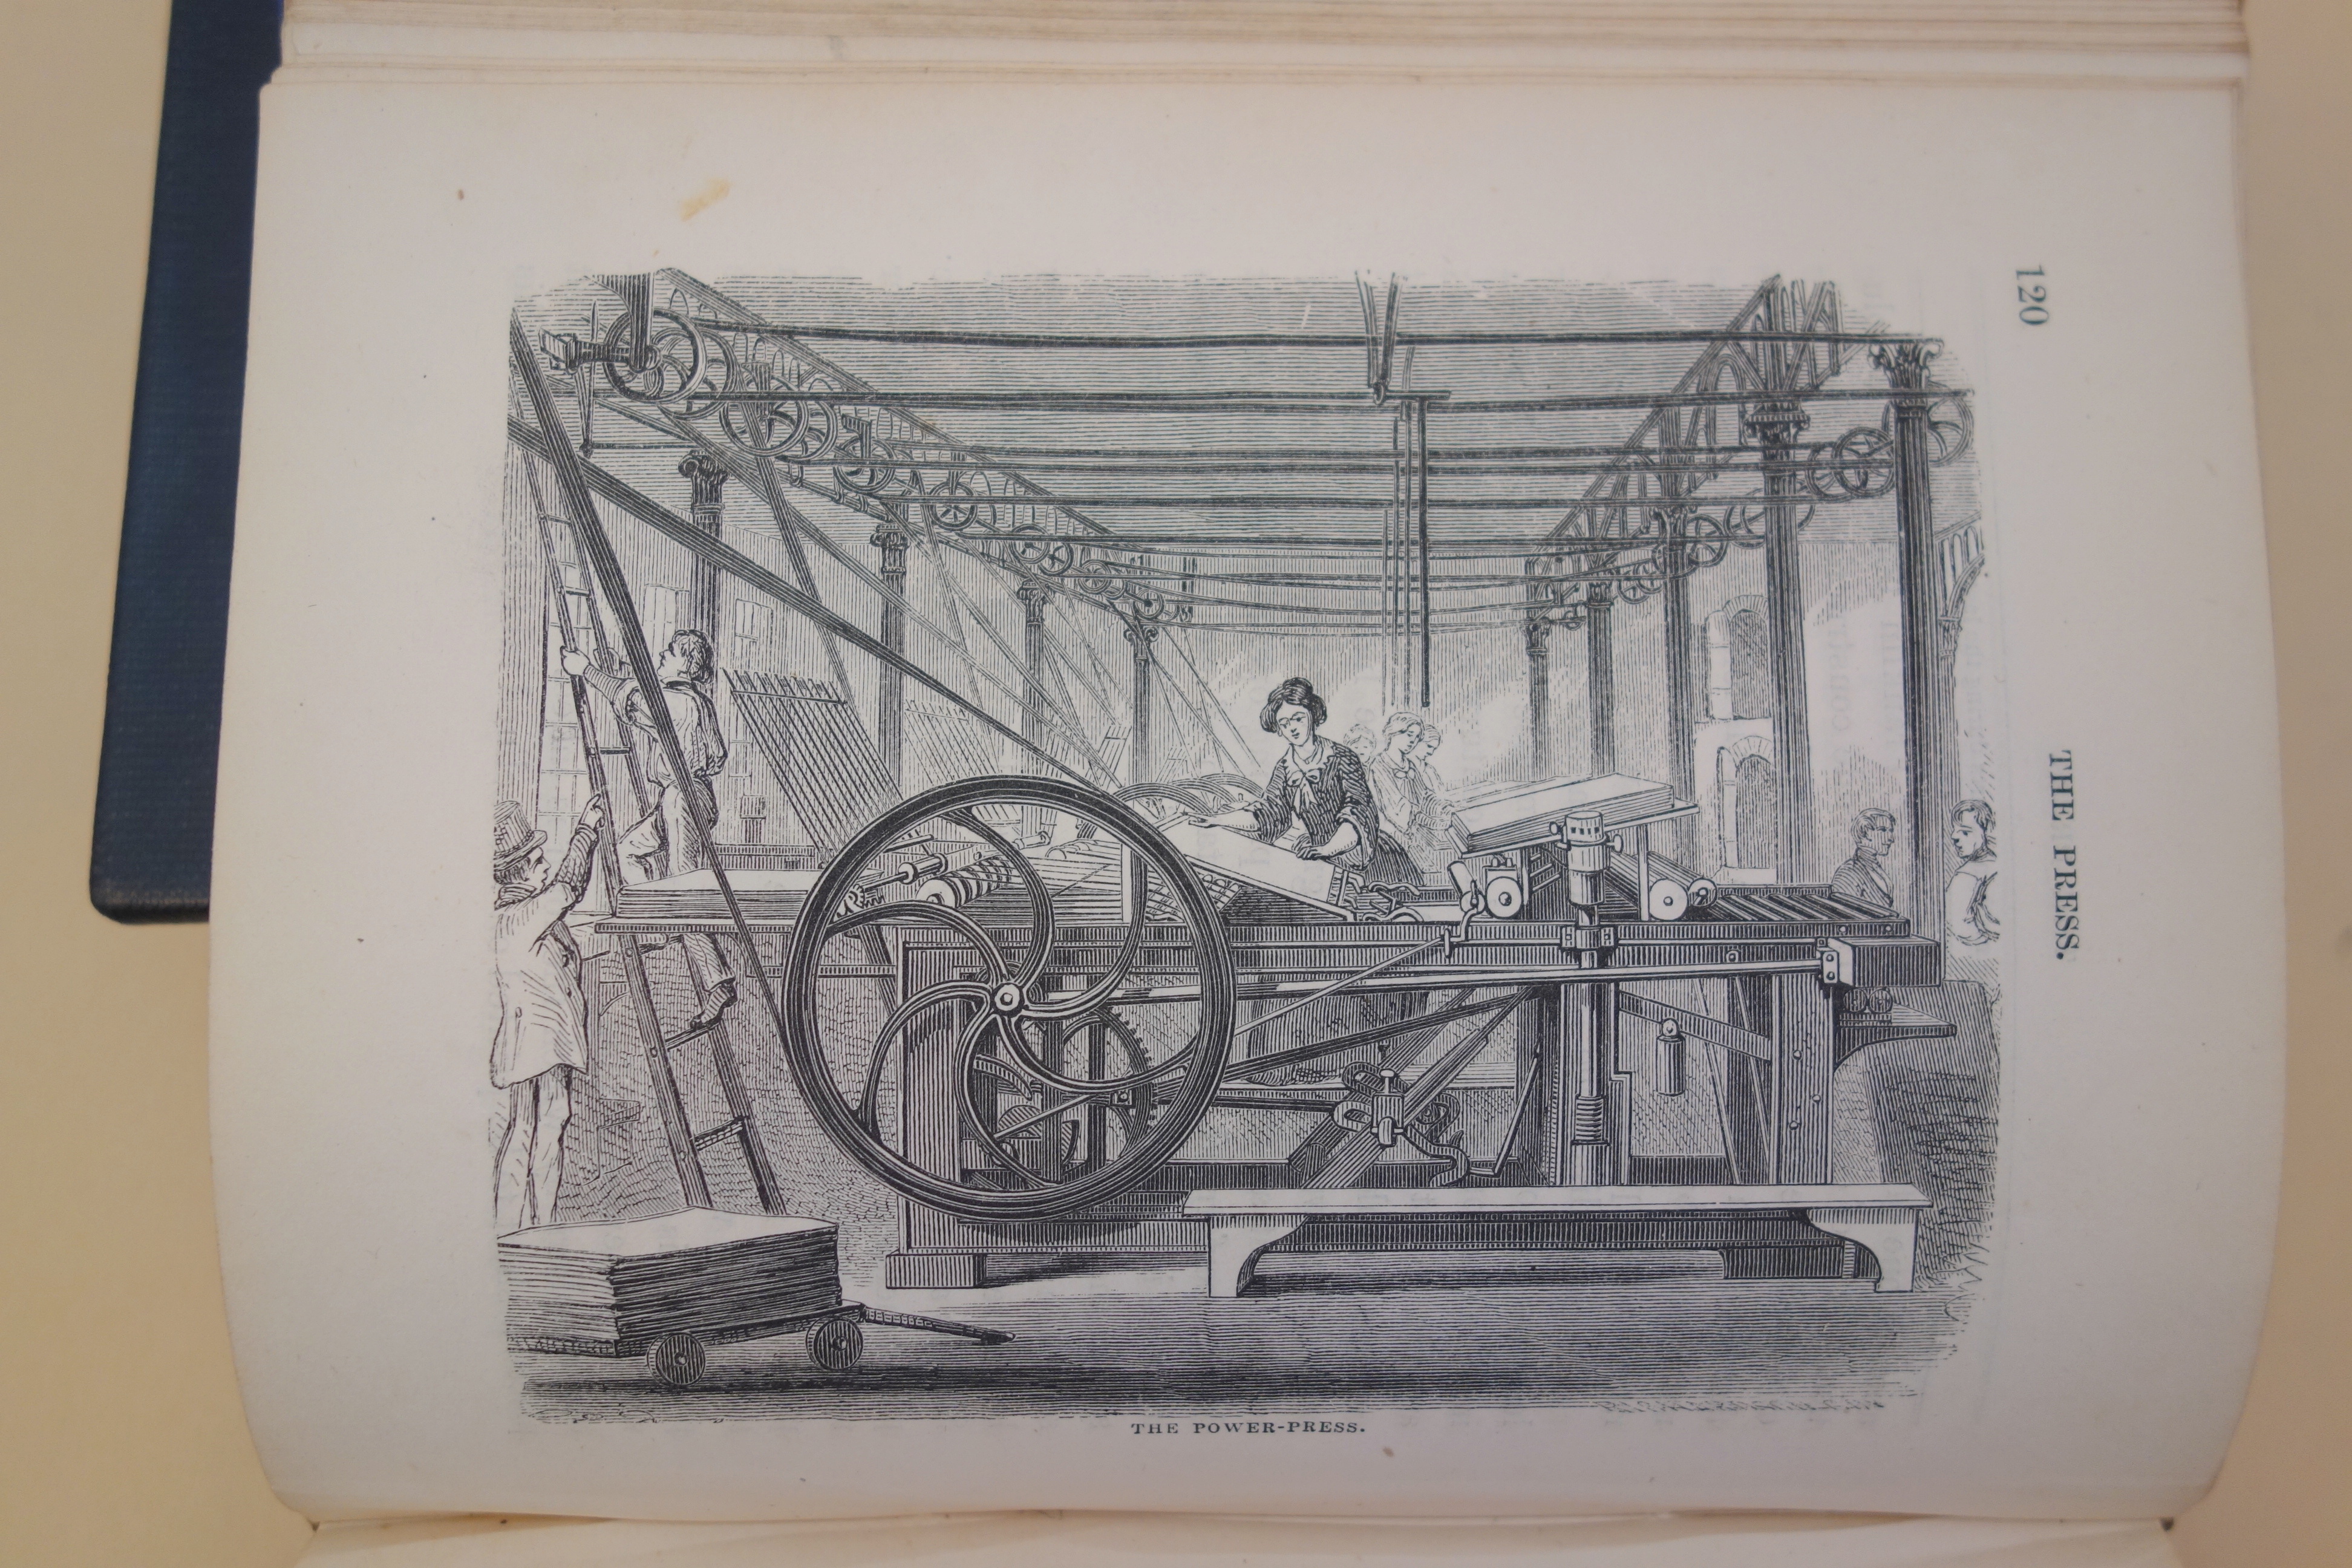 This Adams power press could be operated by women and men; because of the force required, hand presses generally had to be operated by men.